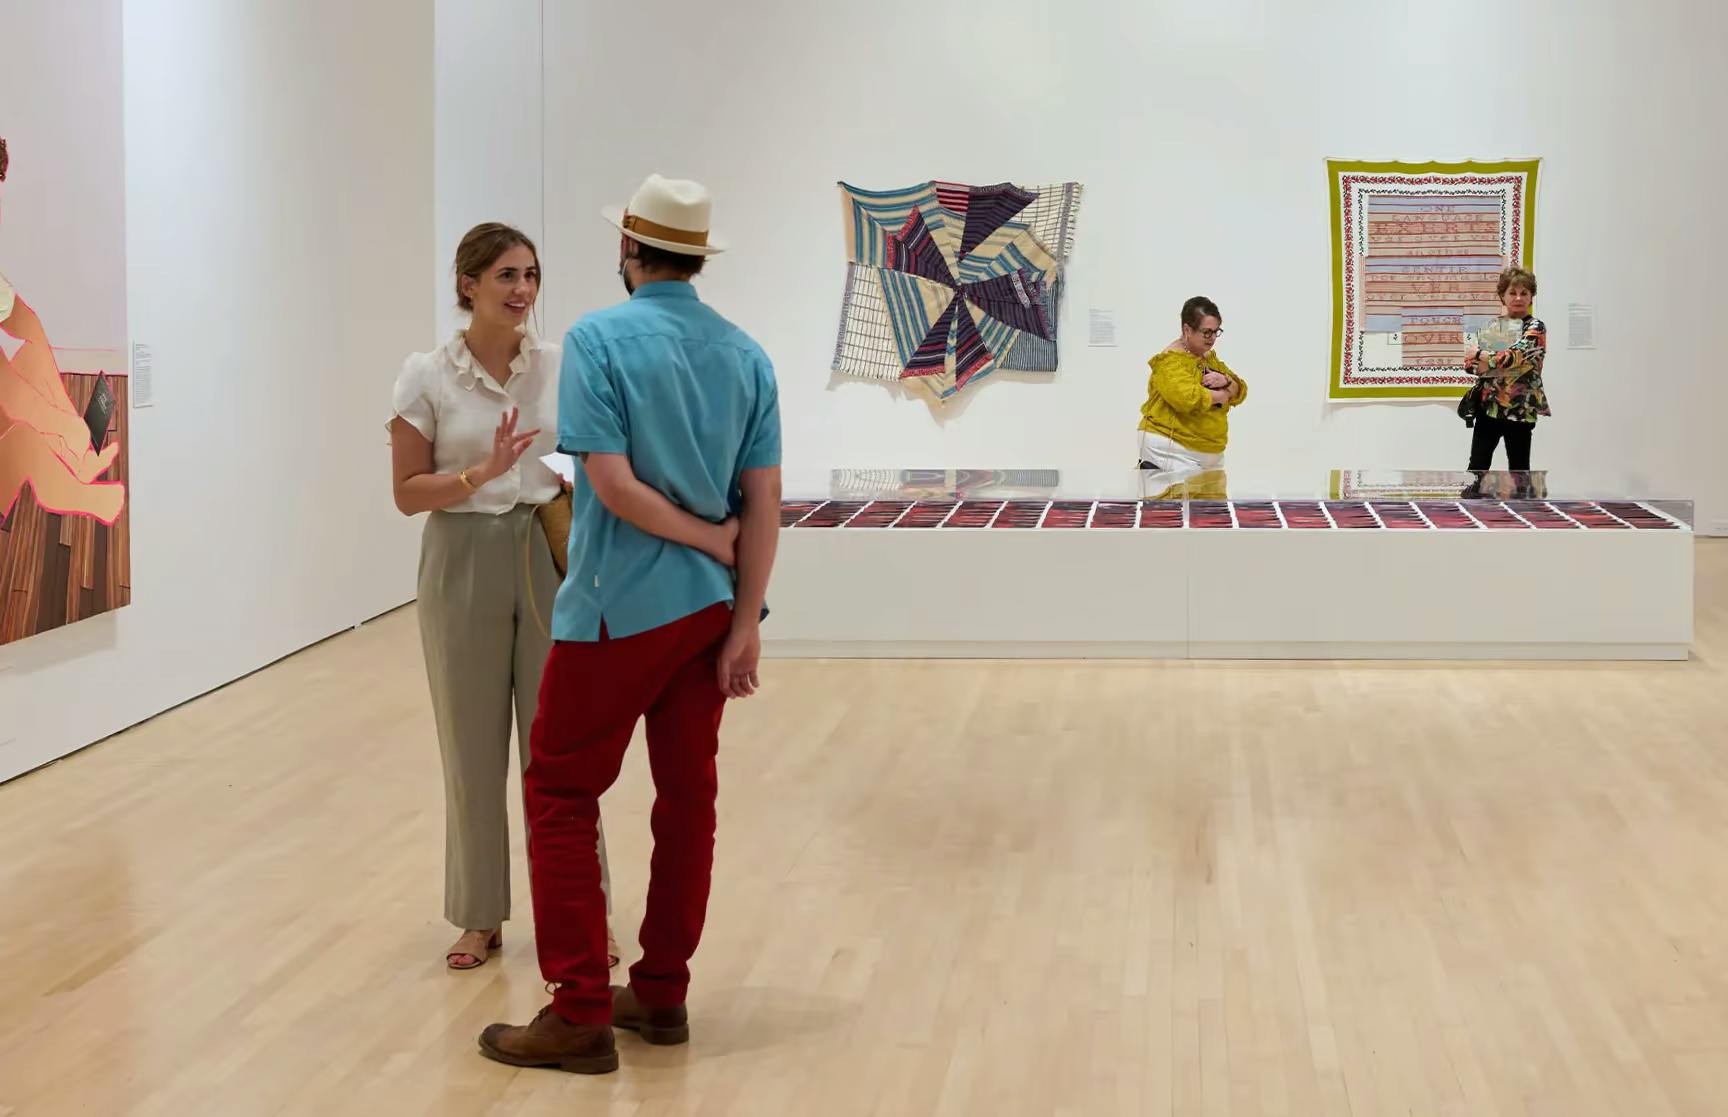 visitors looking at art at the Kemper Museum of Contemporary Art